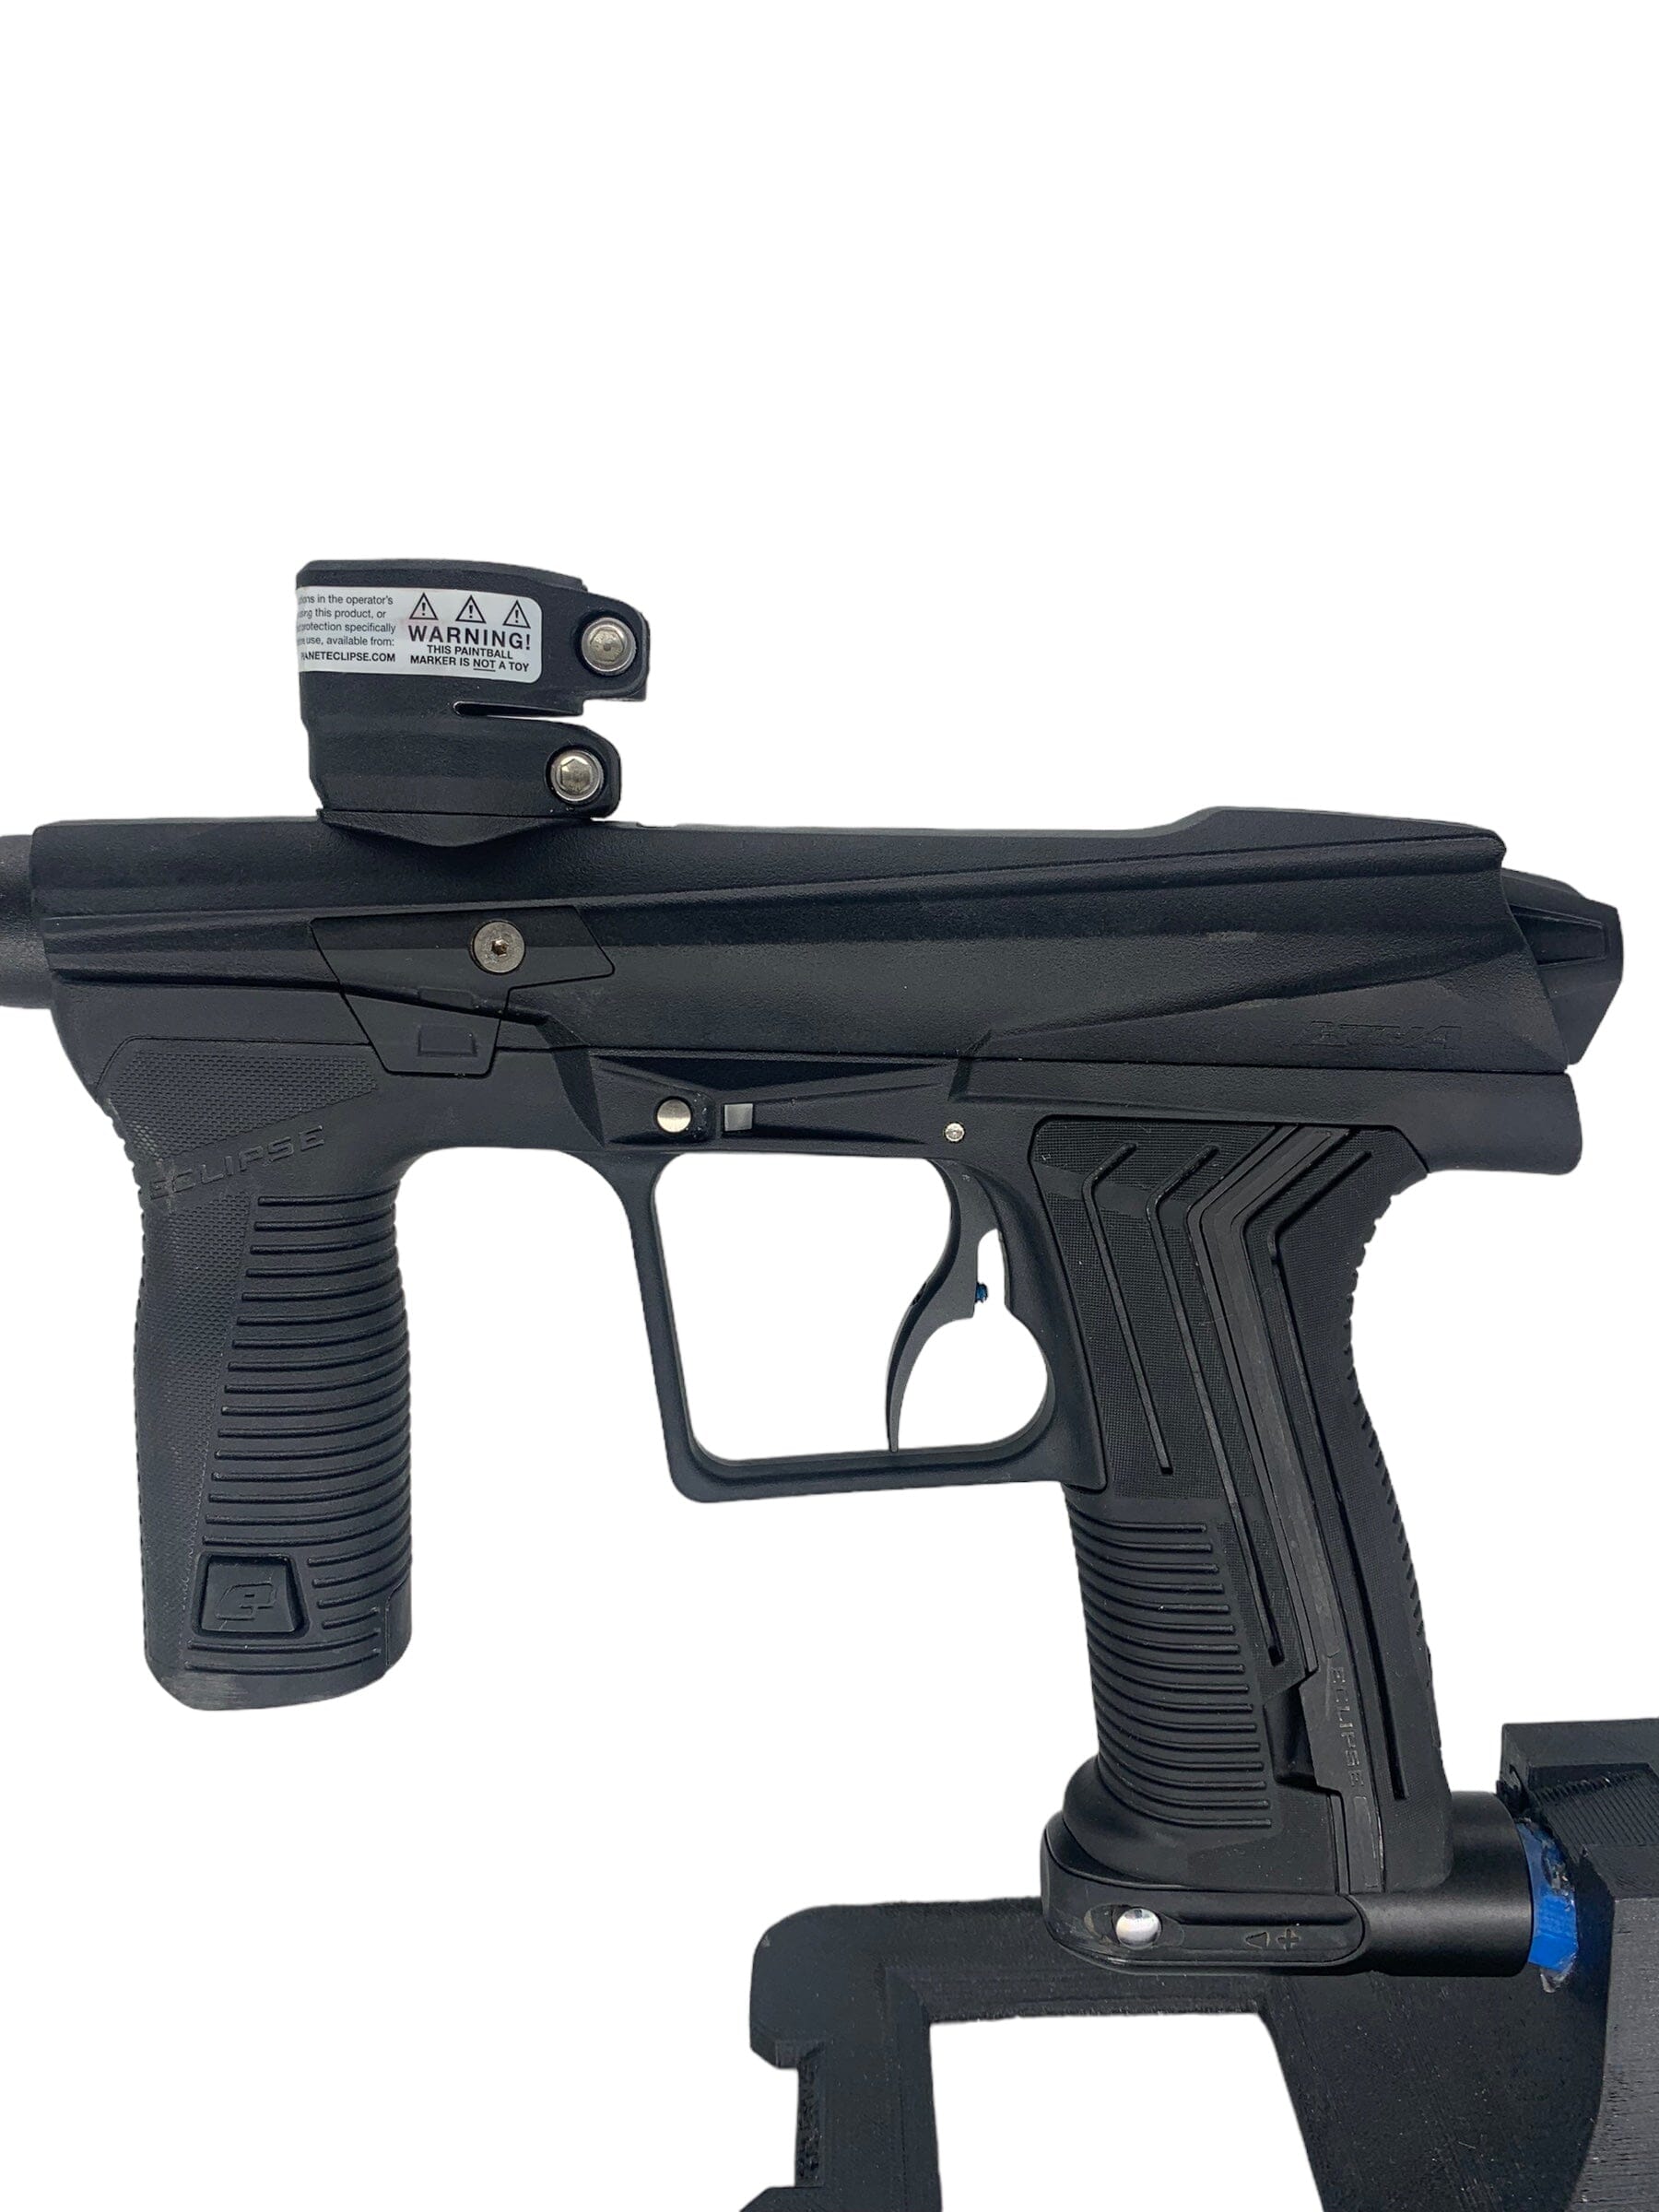 Used Planet Eclipse Etha 2 Pal Paintball Gun Paintball Gun from CPXBrosPaintball Buy/Sell/Trade Paintball Markers, New Paintball Guns, Paintball Hoppers, Paintball Masks, and Hormesis Headbands